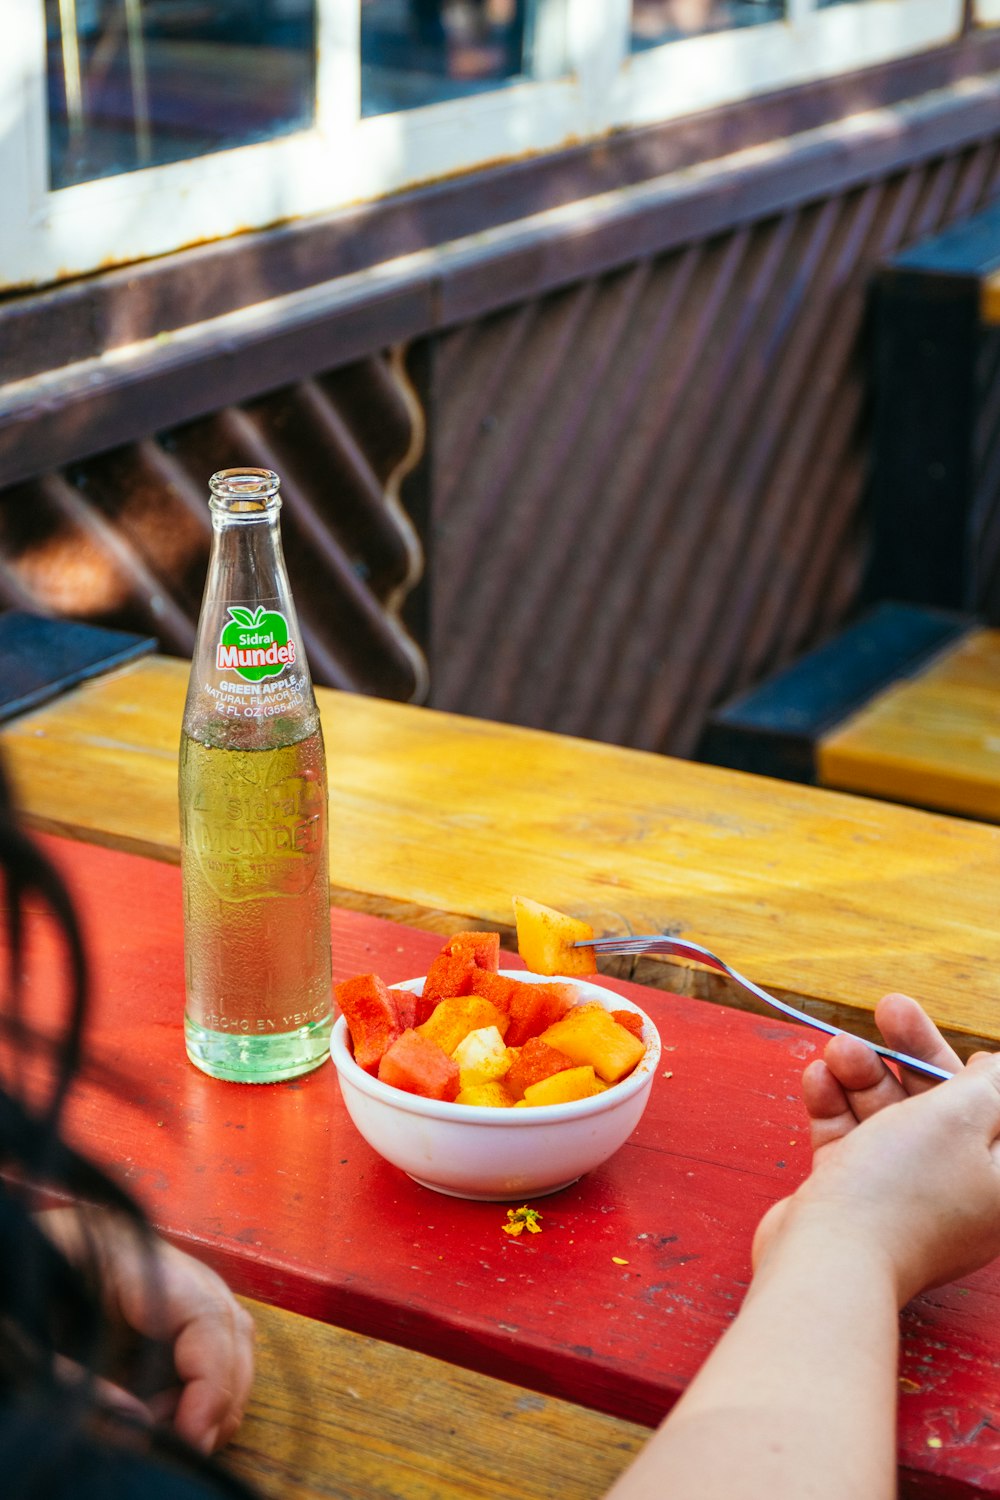 a person sitting at a table with a bowl of fruit and a bottle of soda